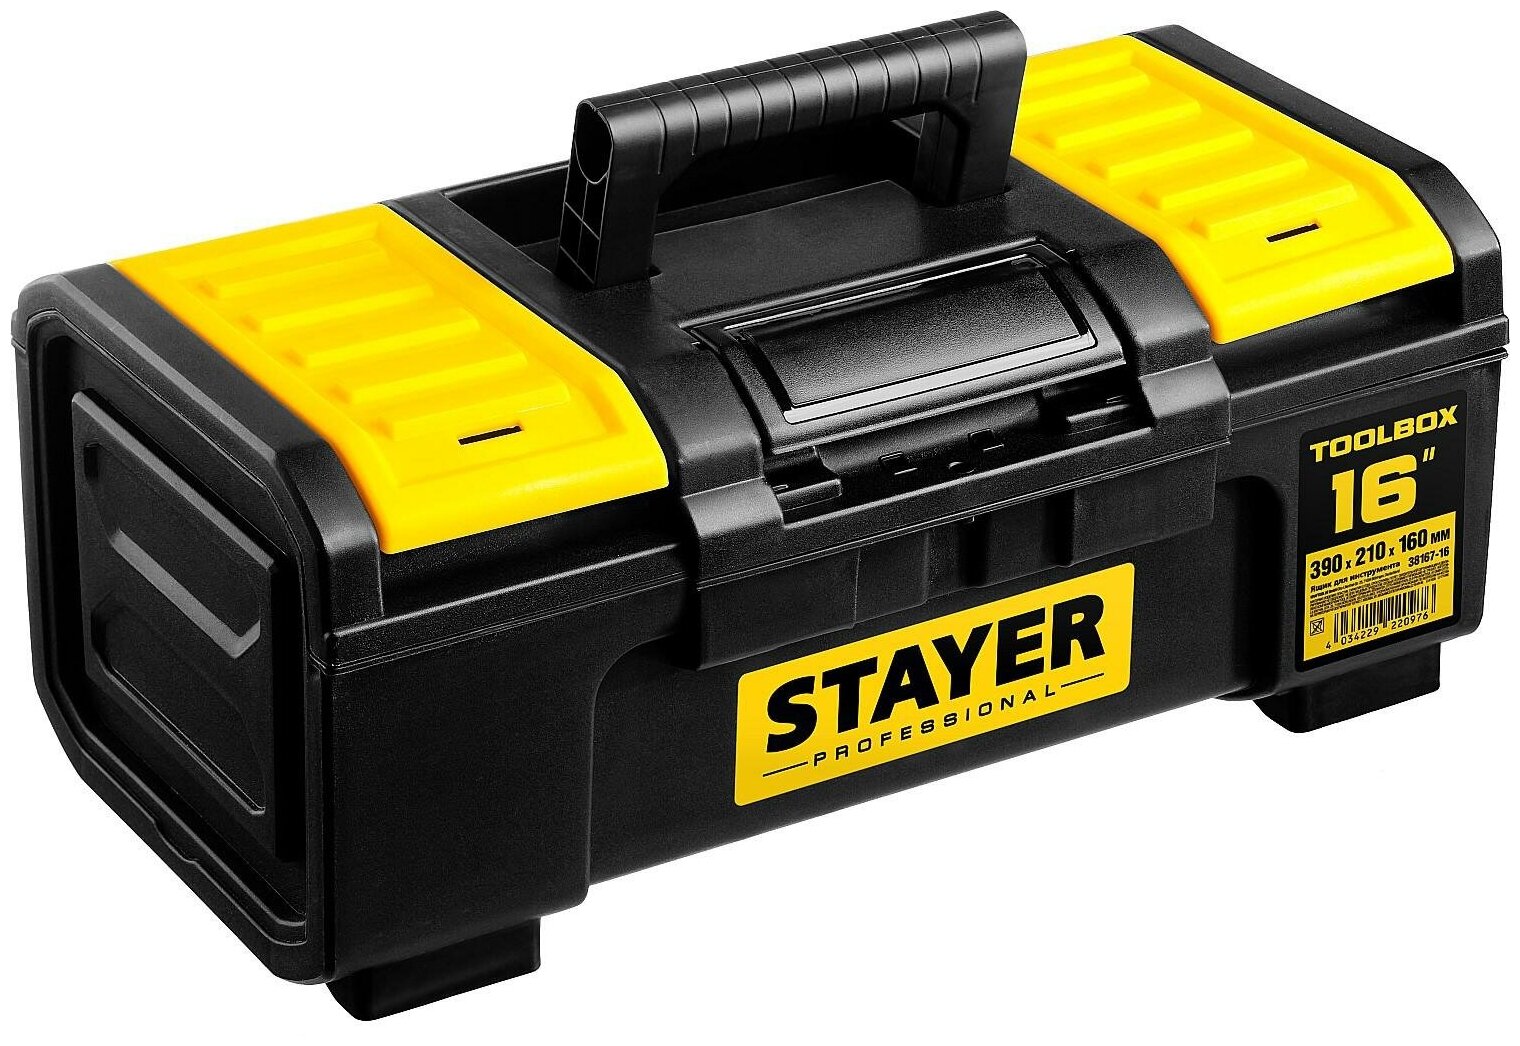 STAYER 390  210  160, ,    TOOLBOX-16 38167-16 Professional